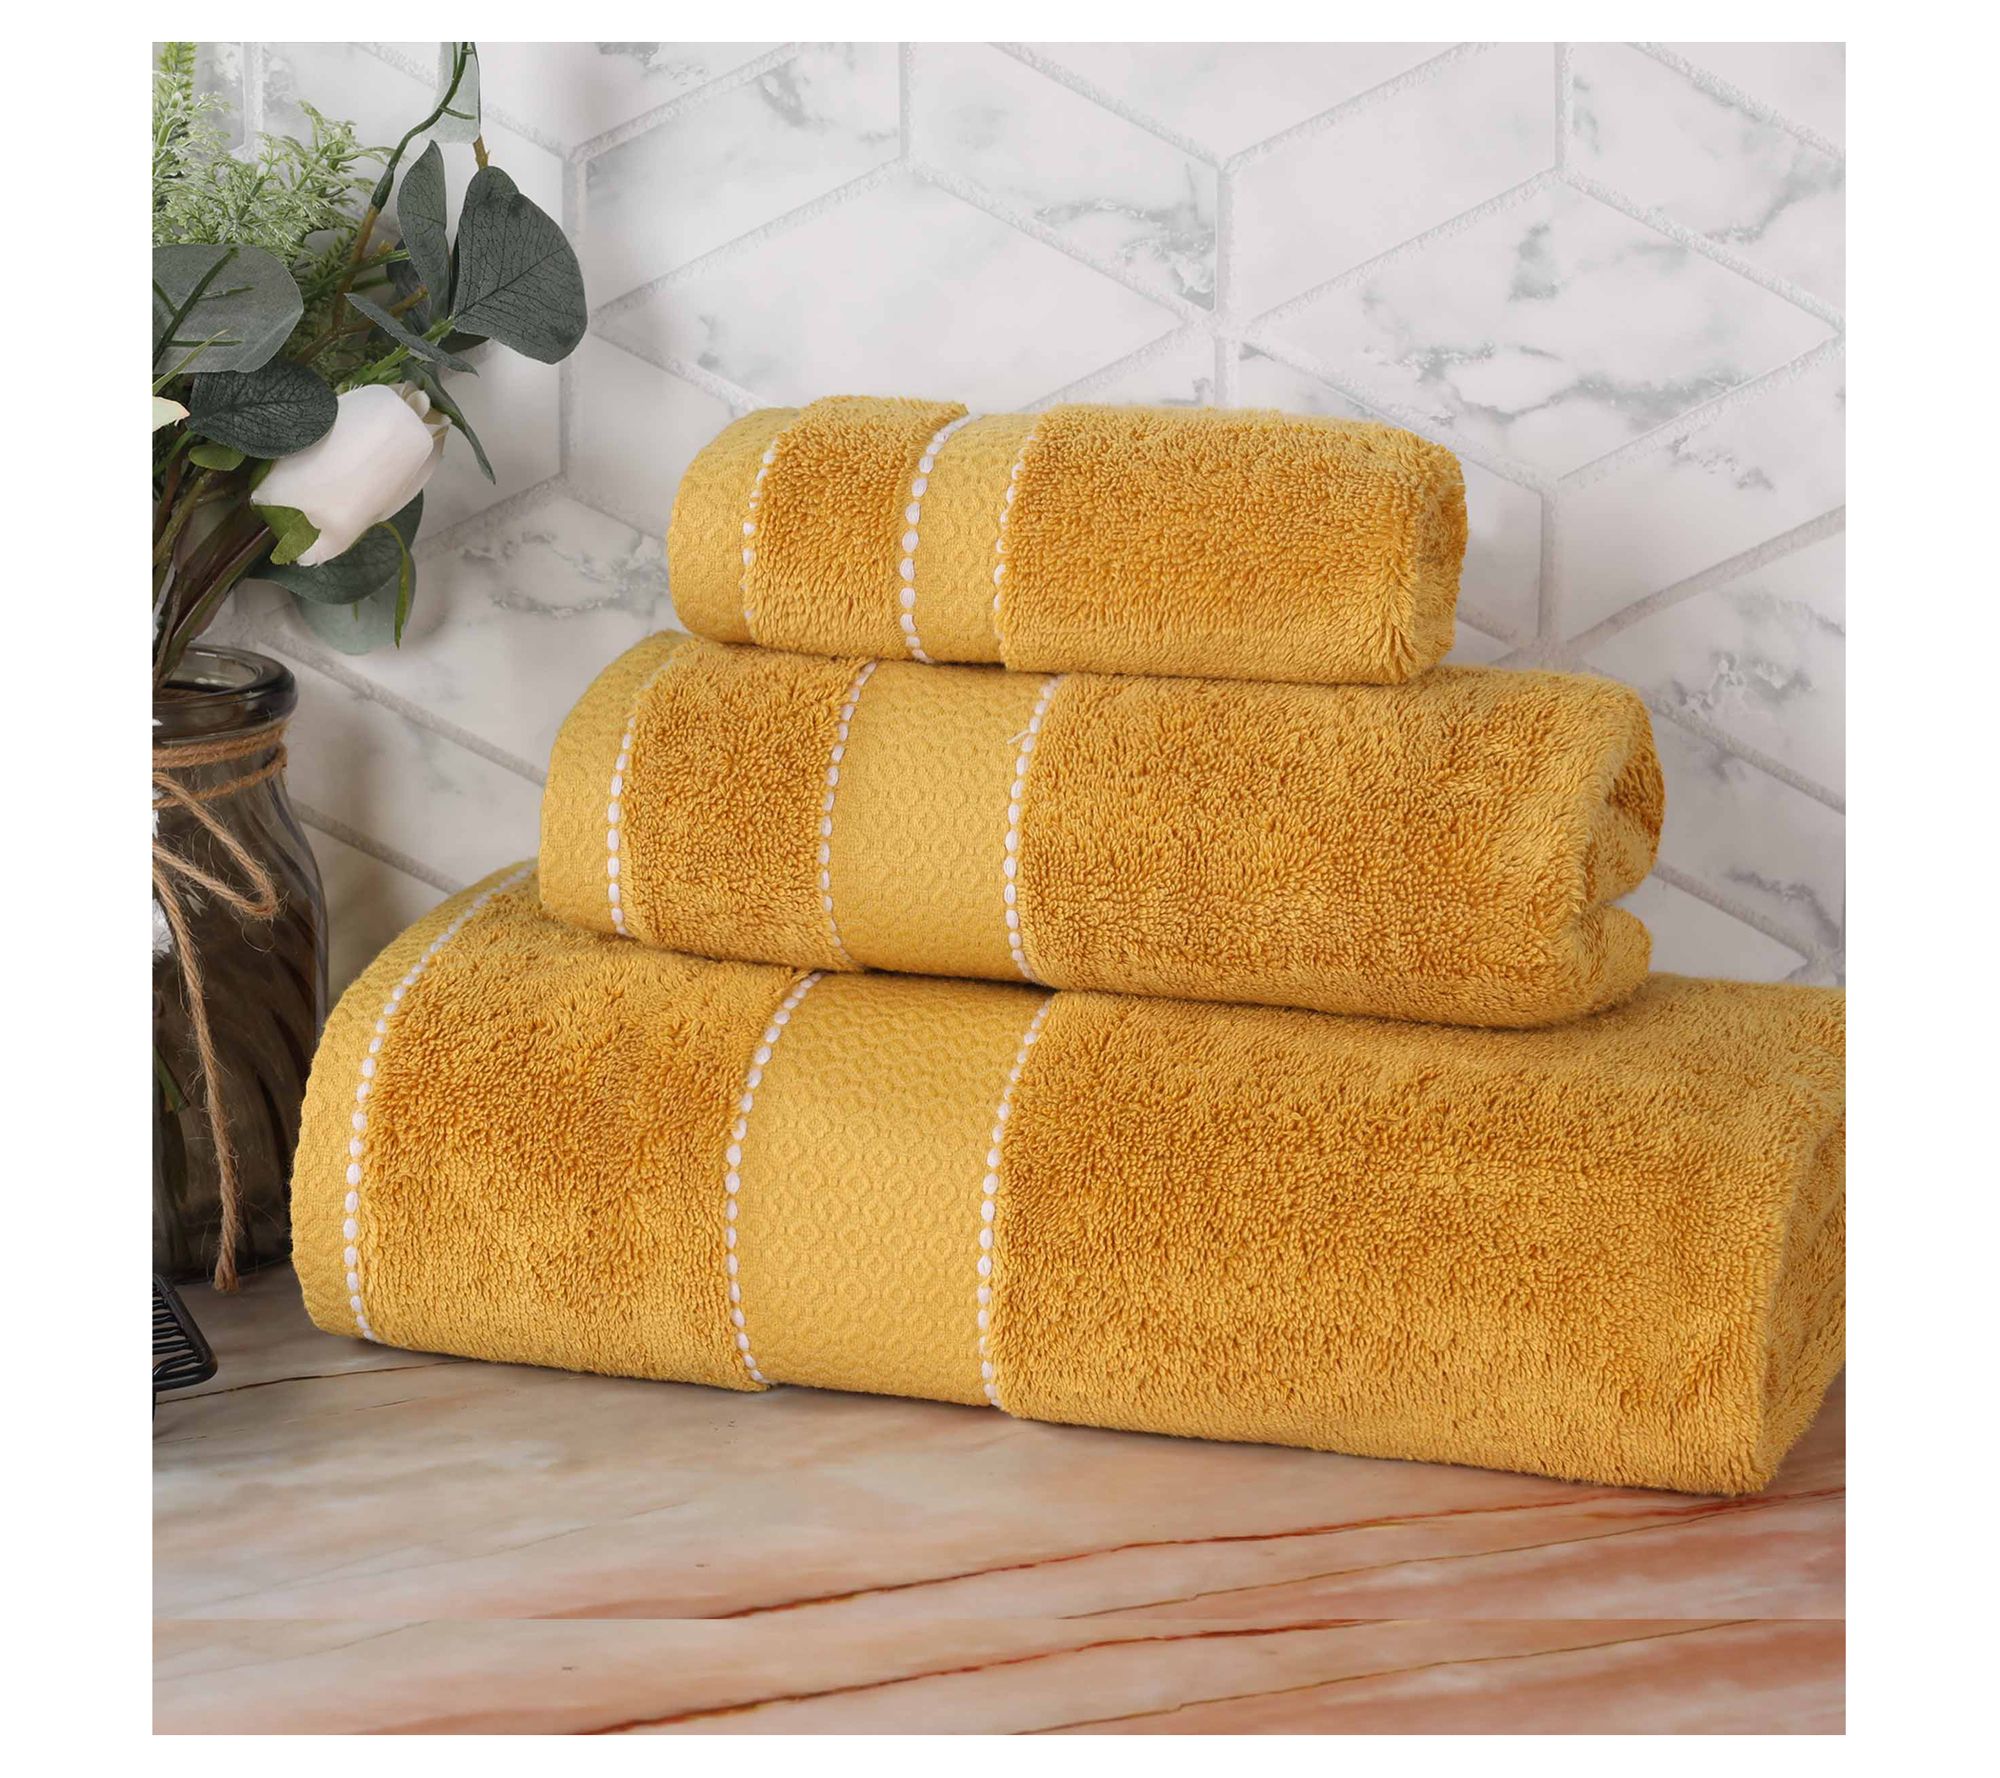 Superior Collection - 900 gsm Egyptian Cotton Towels